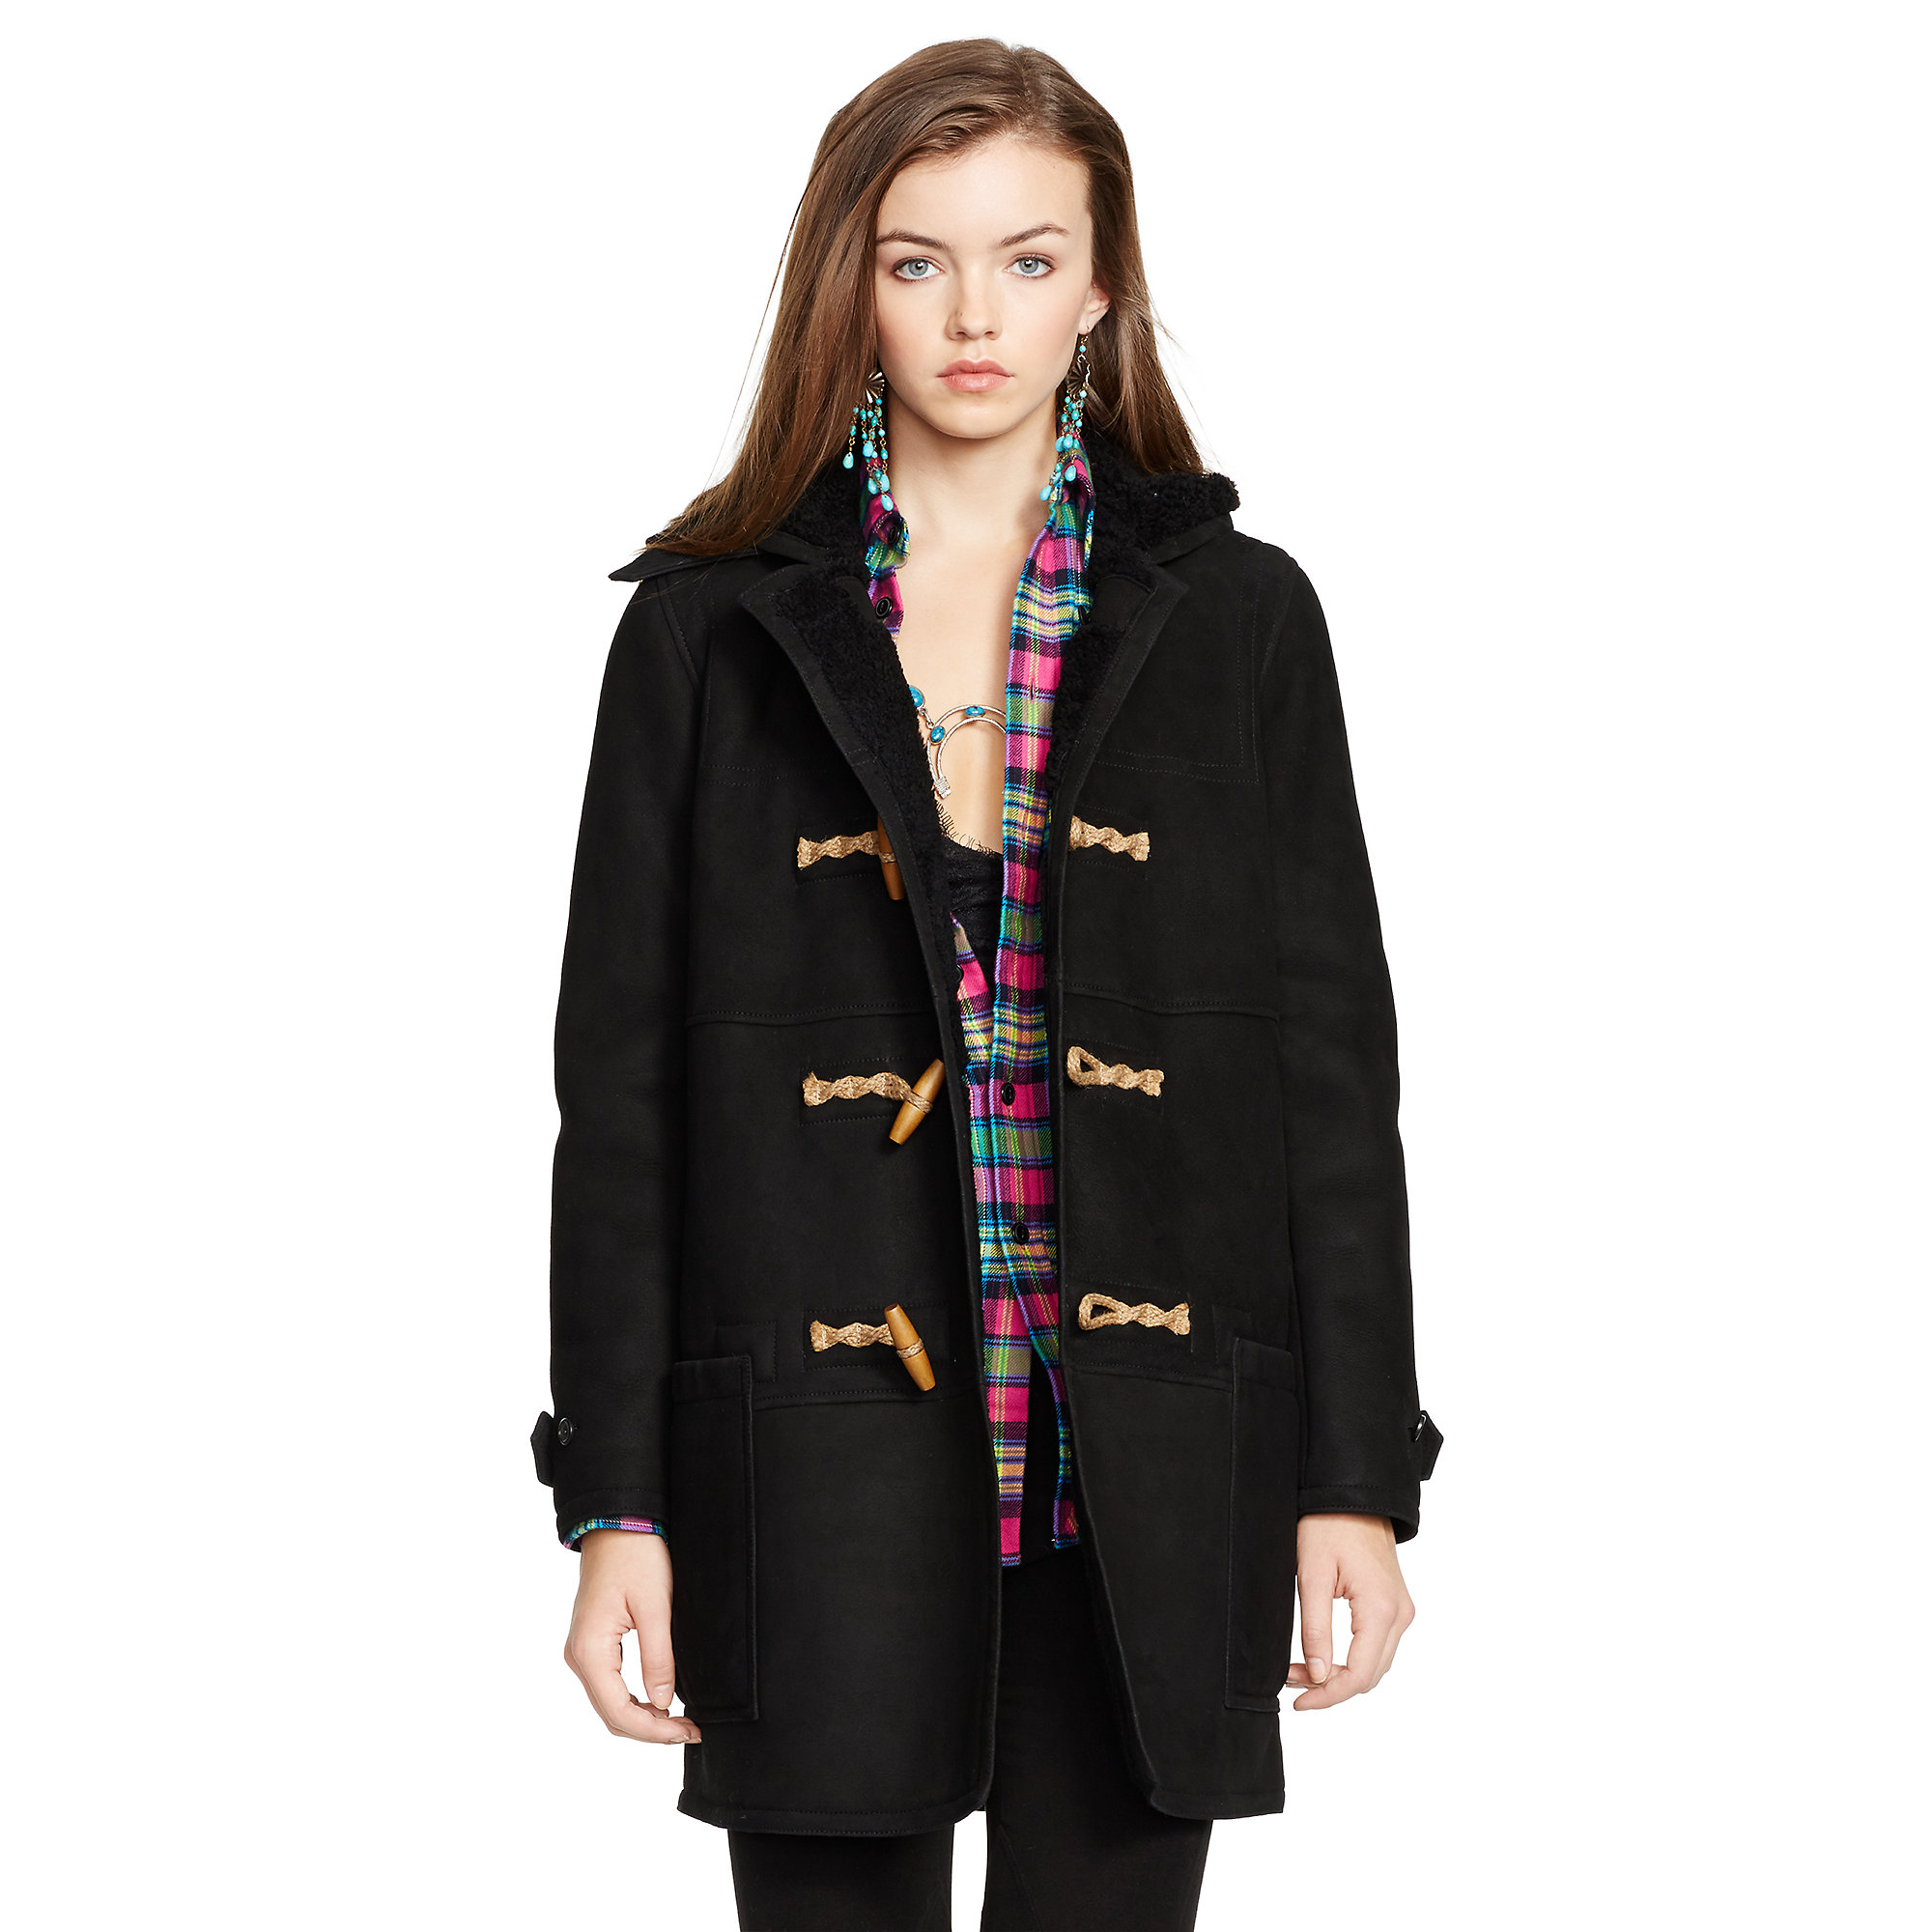 Lyst - Polo Ralph Lauren Hooded Shearling Toggle Coat in Black